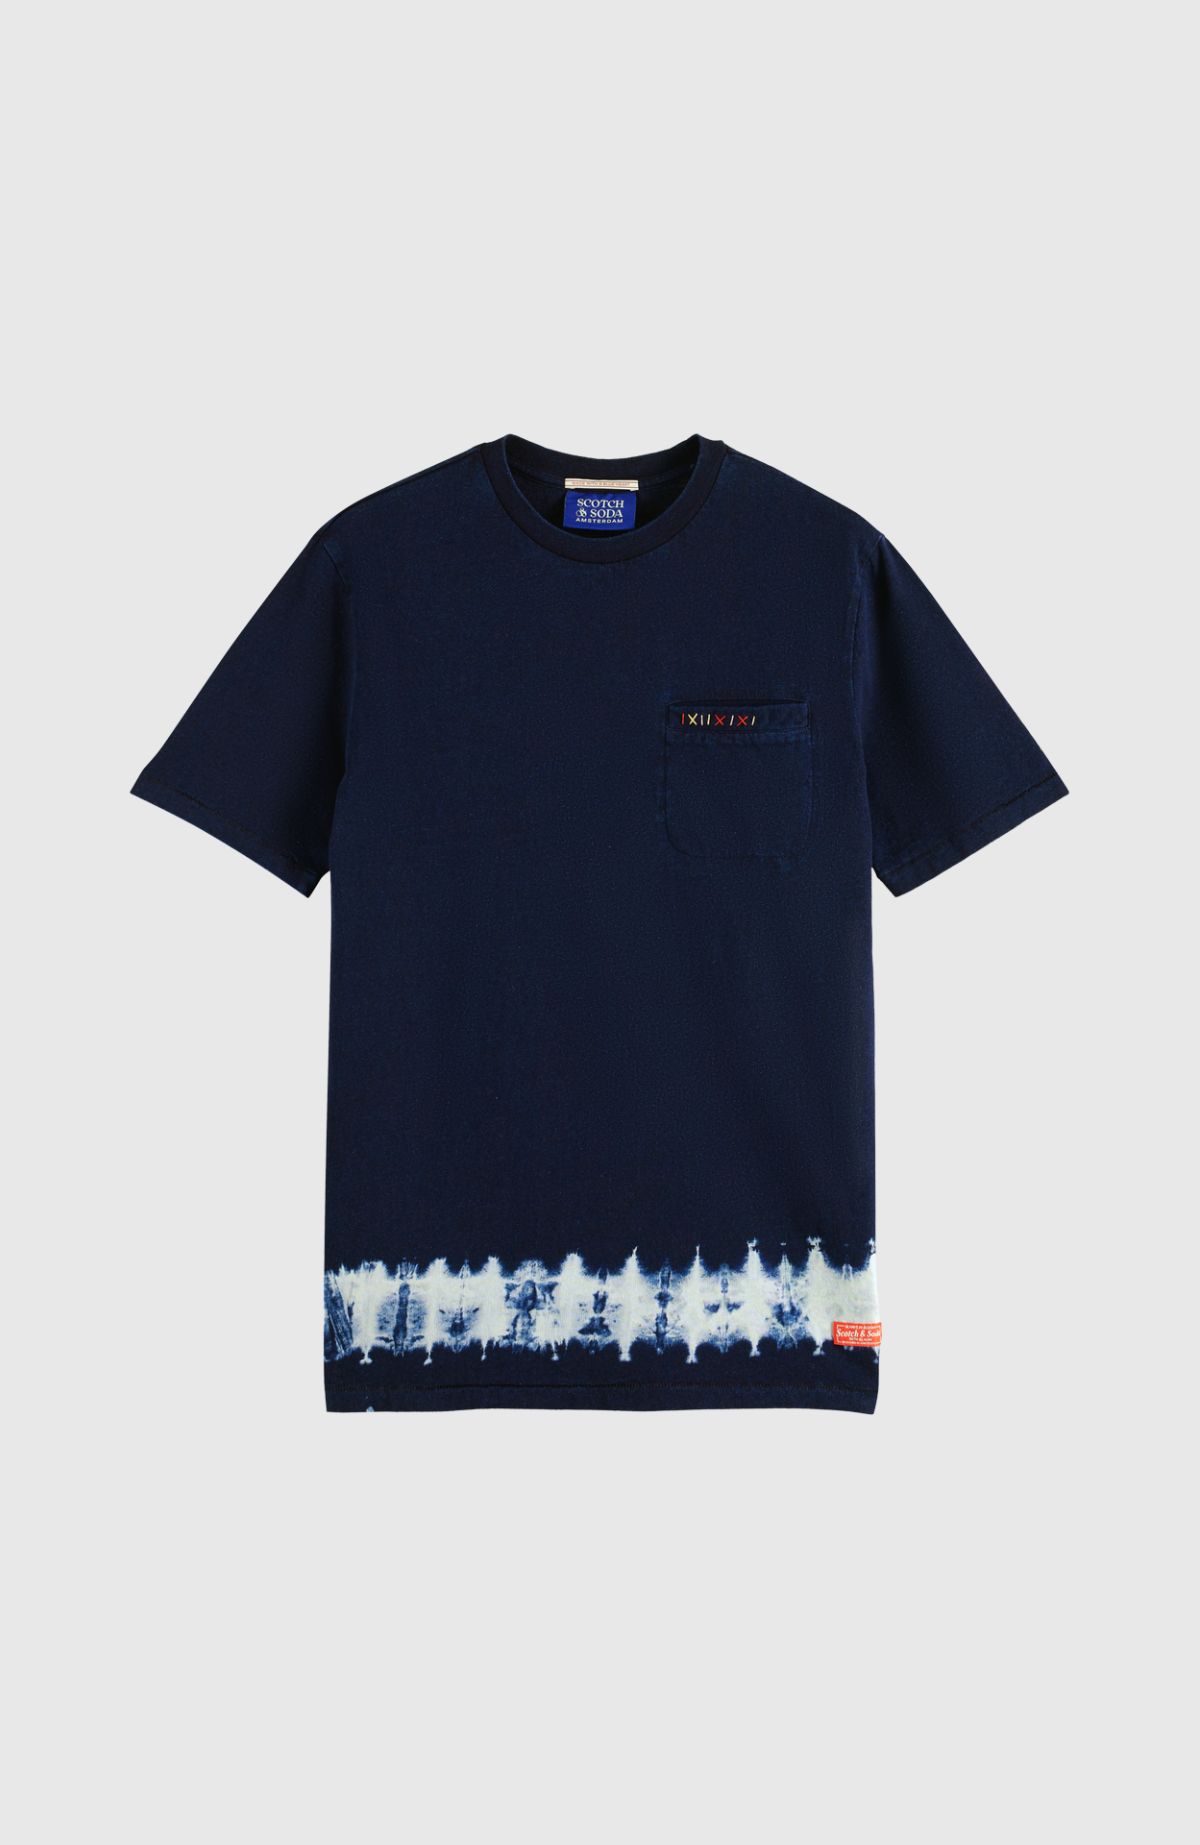 Indigo tee with placement tie-dye